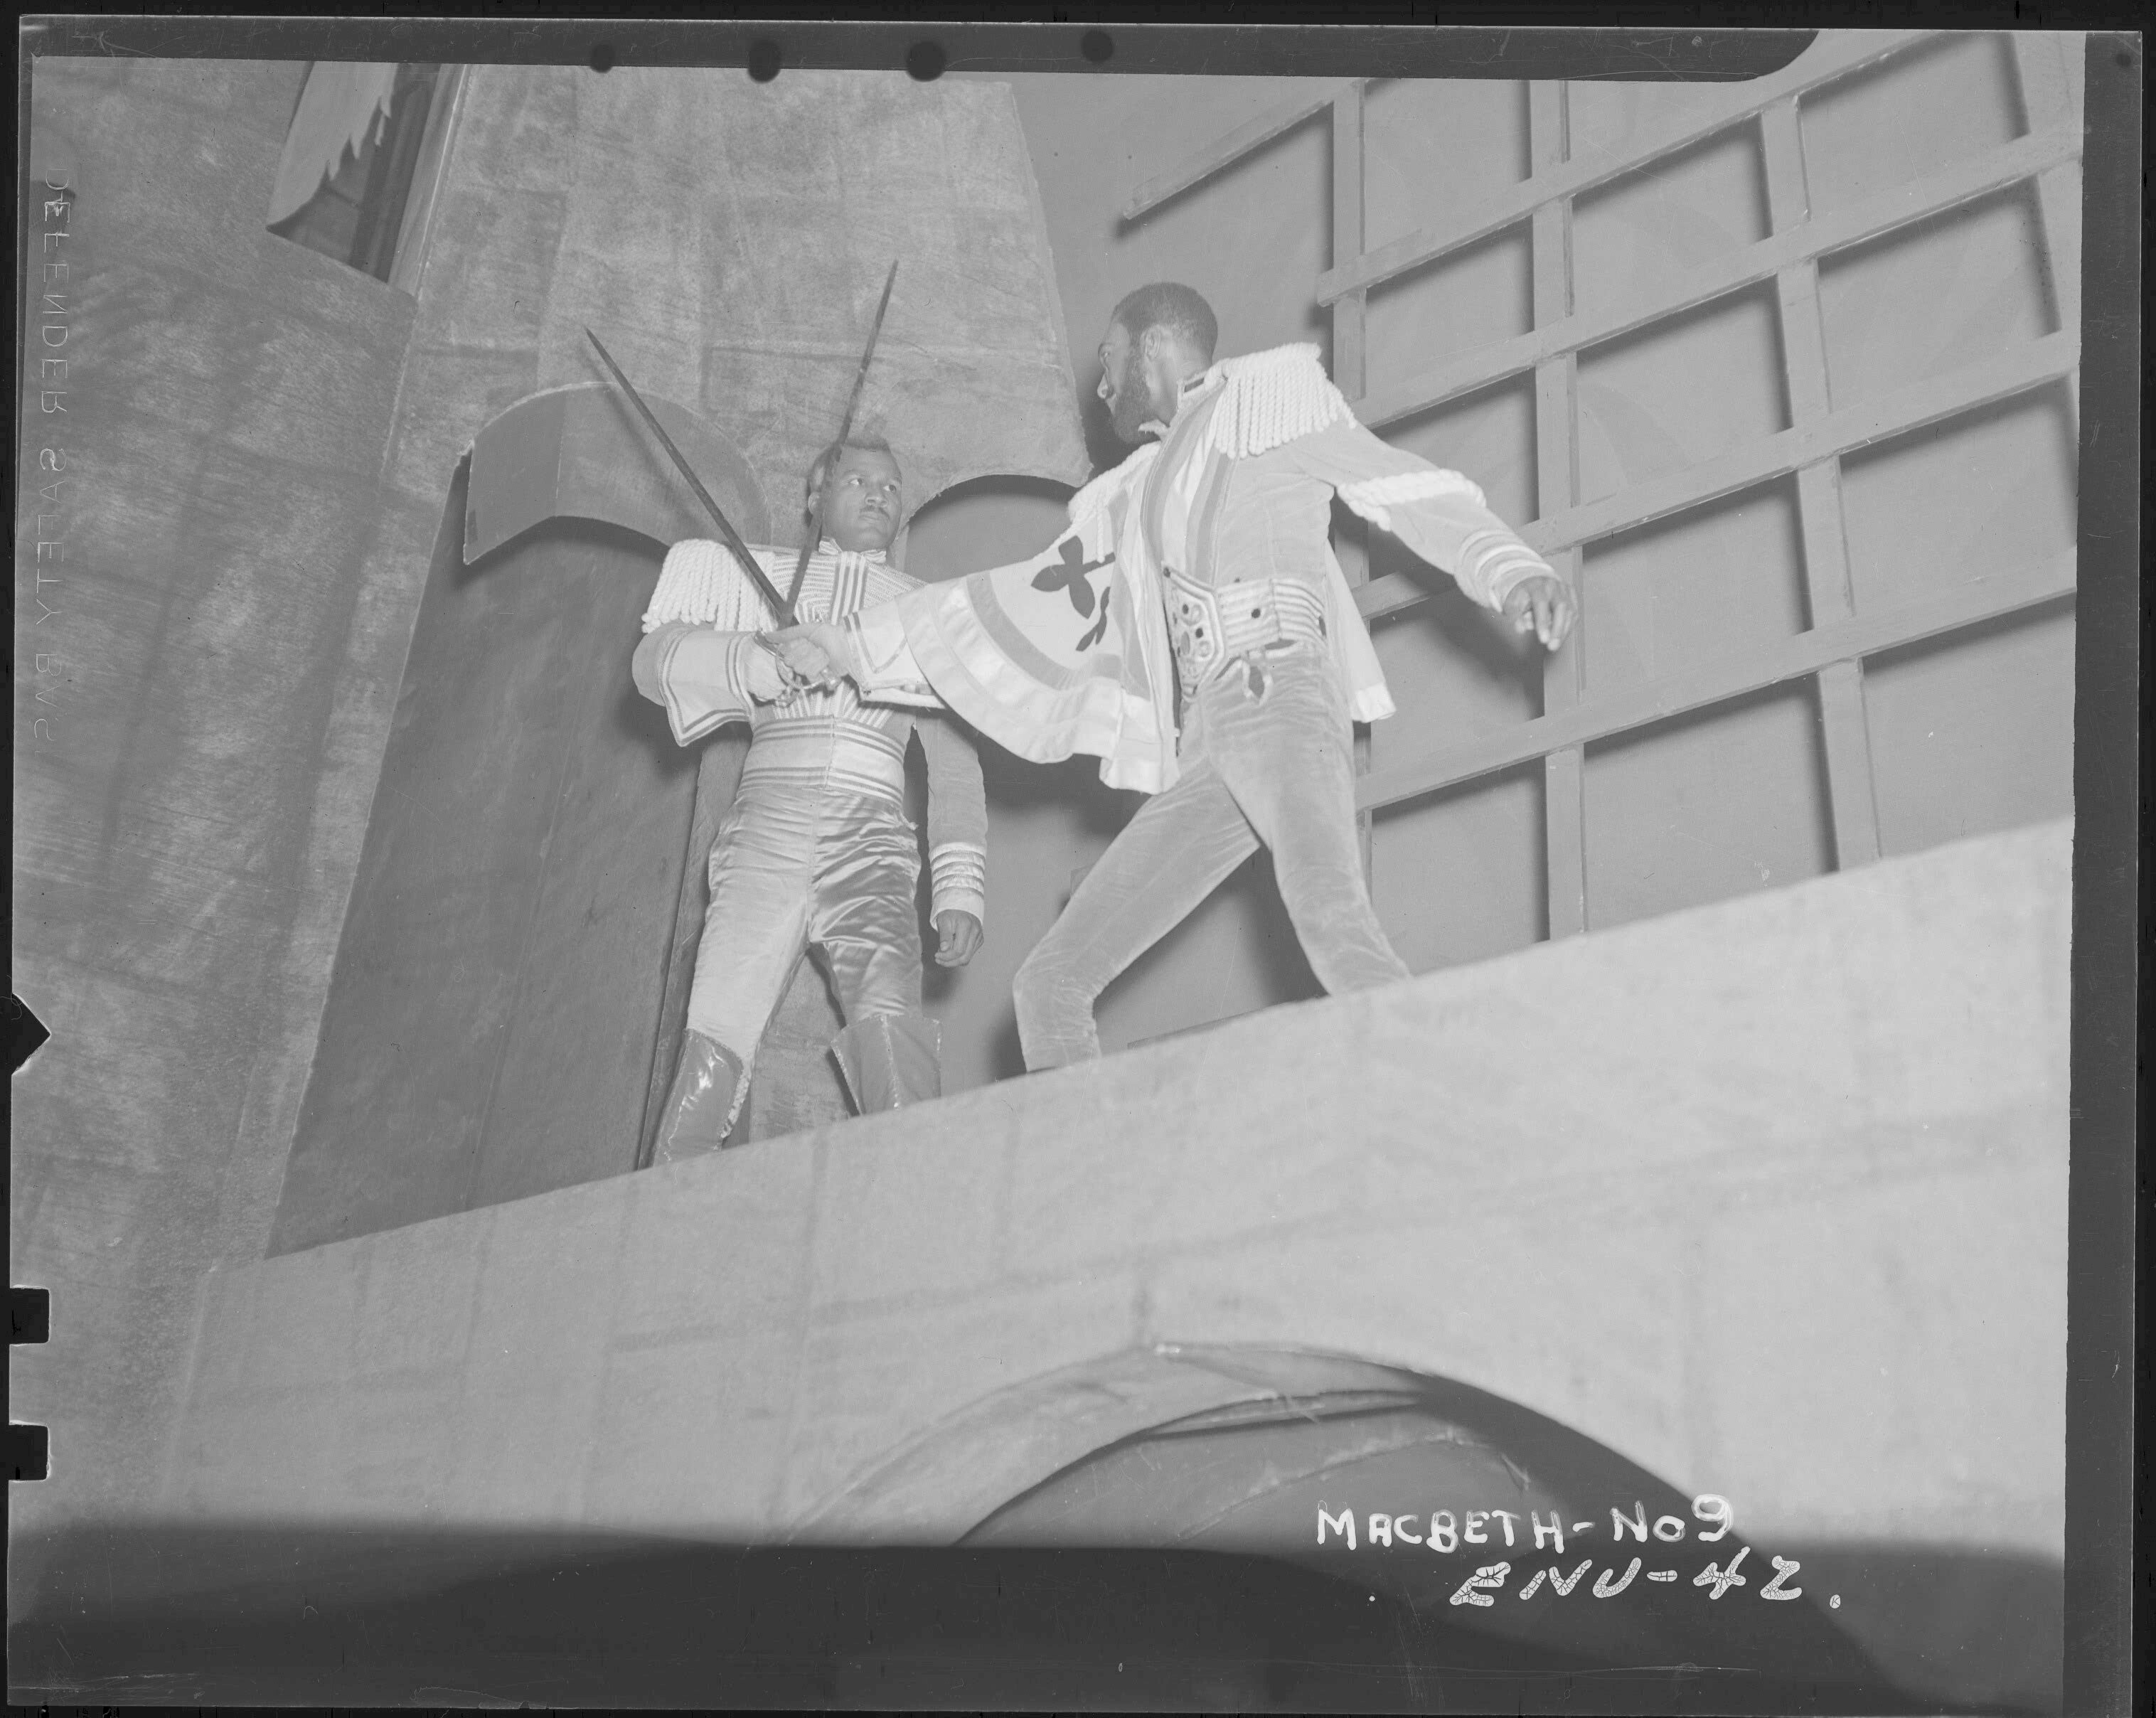 Photograph of Charles Collins (left, Macduff) and Maurice Ellis (right, Macbeth) swordfighting atop a plinth during the climax of the play.